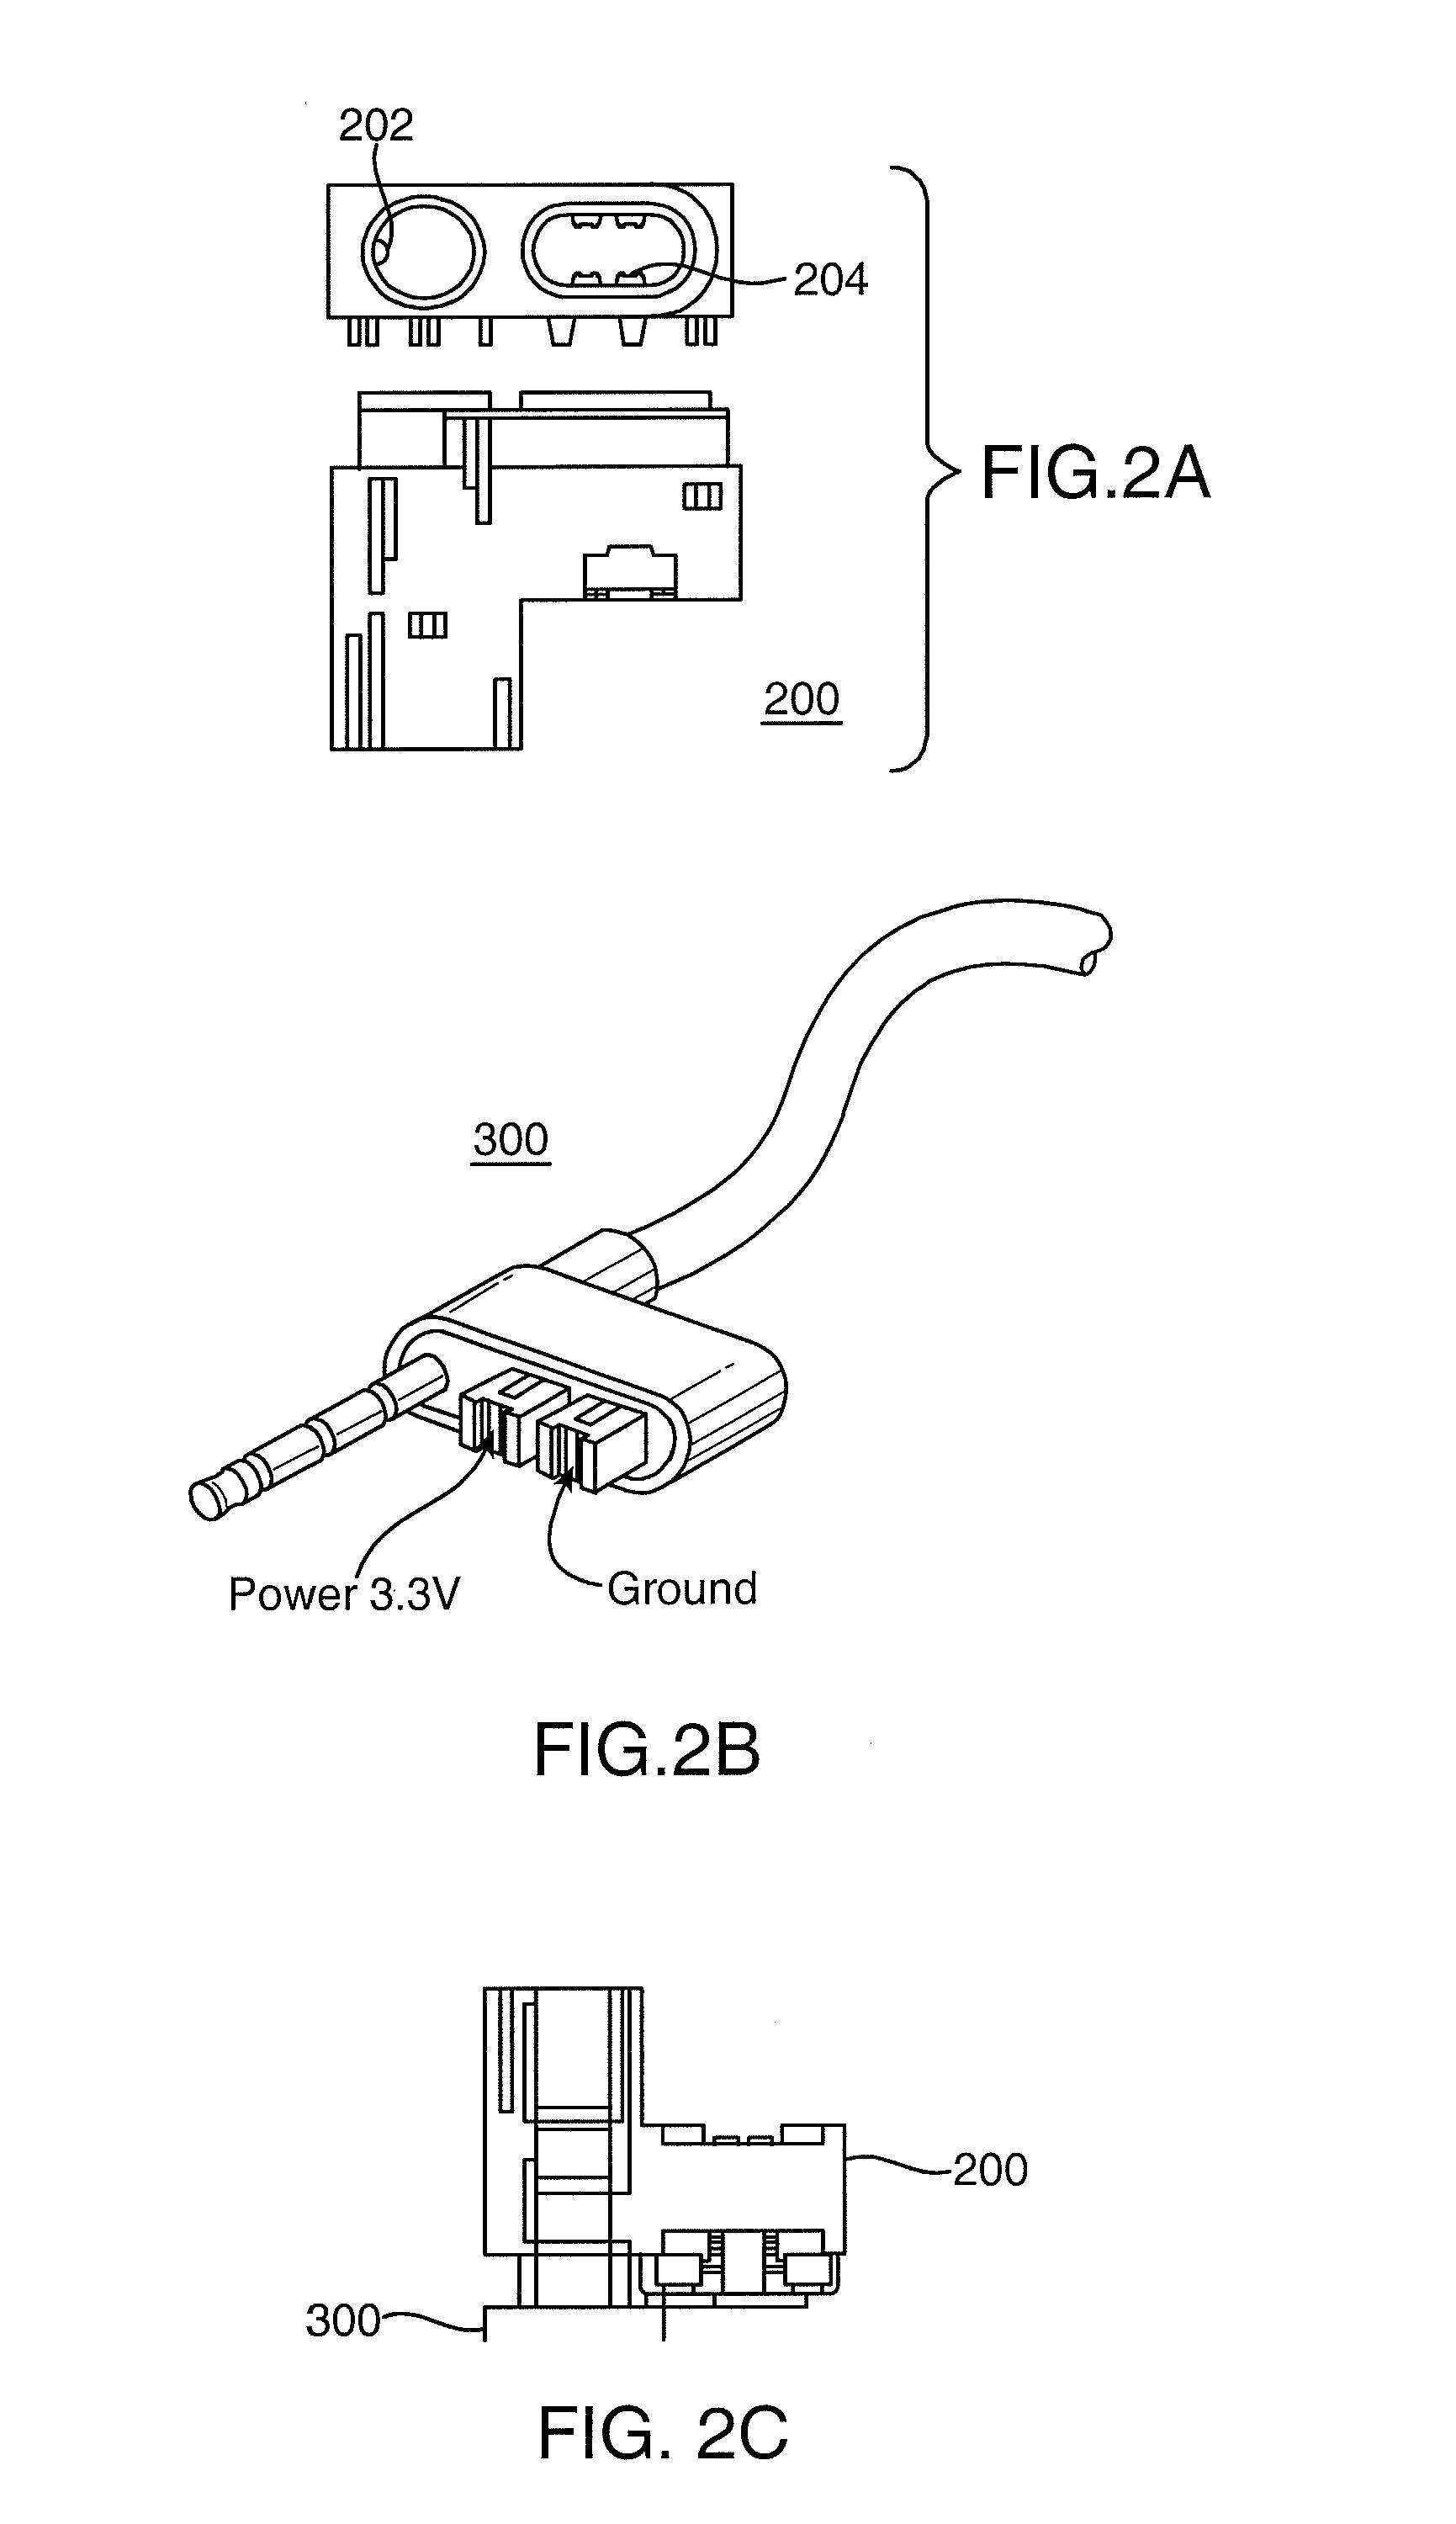 Communication between an accessory and a media player with multiple protocol versions